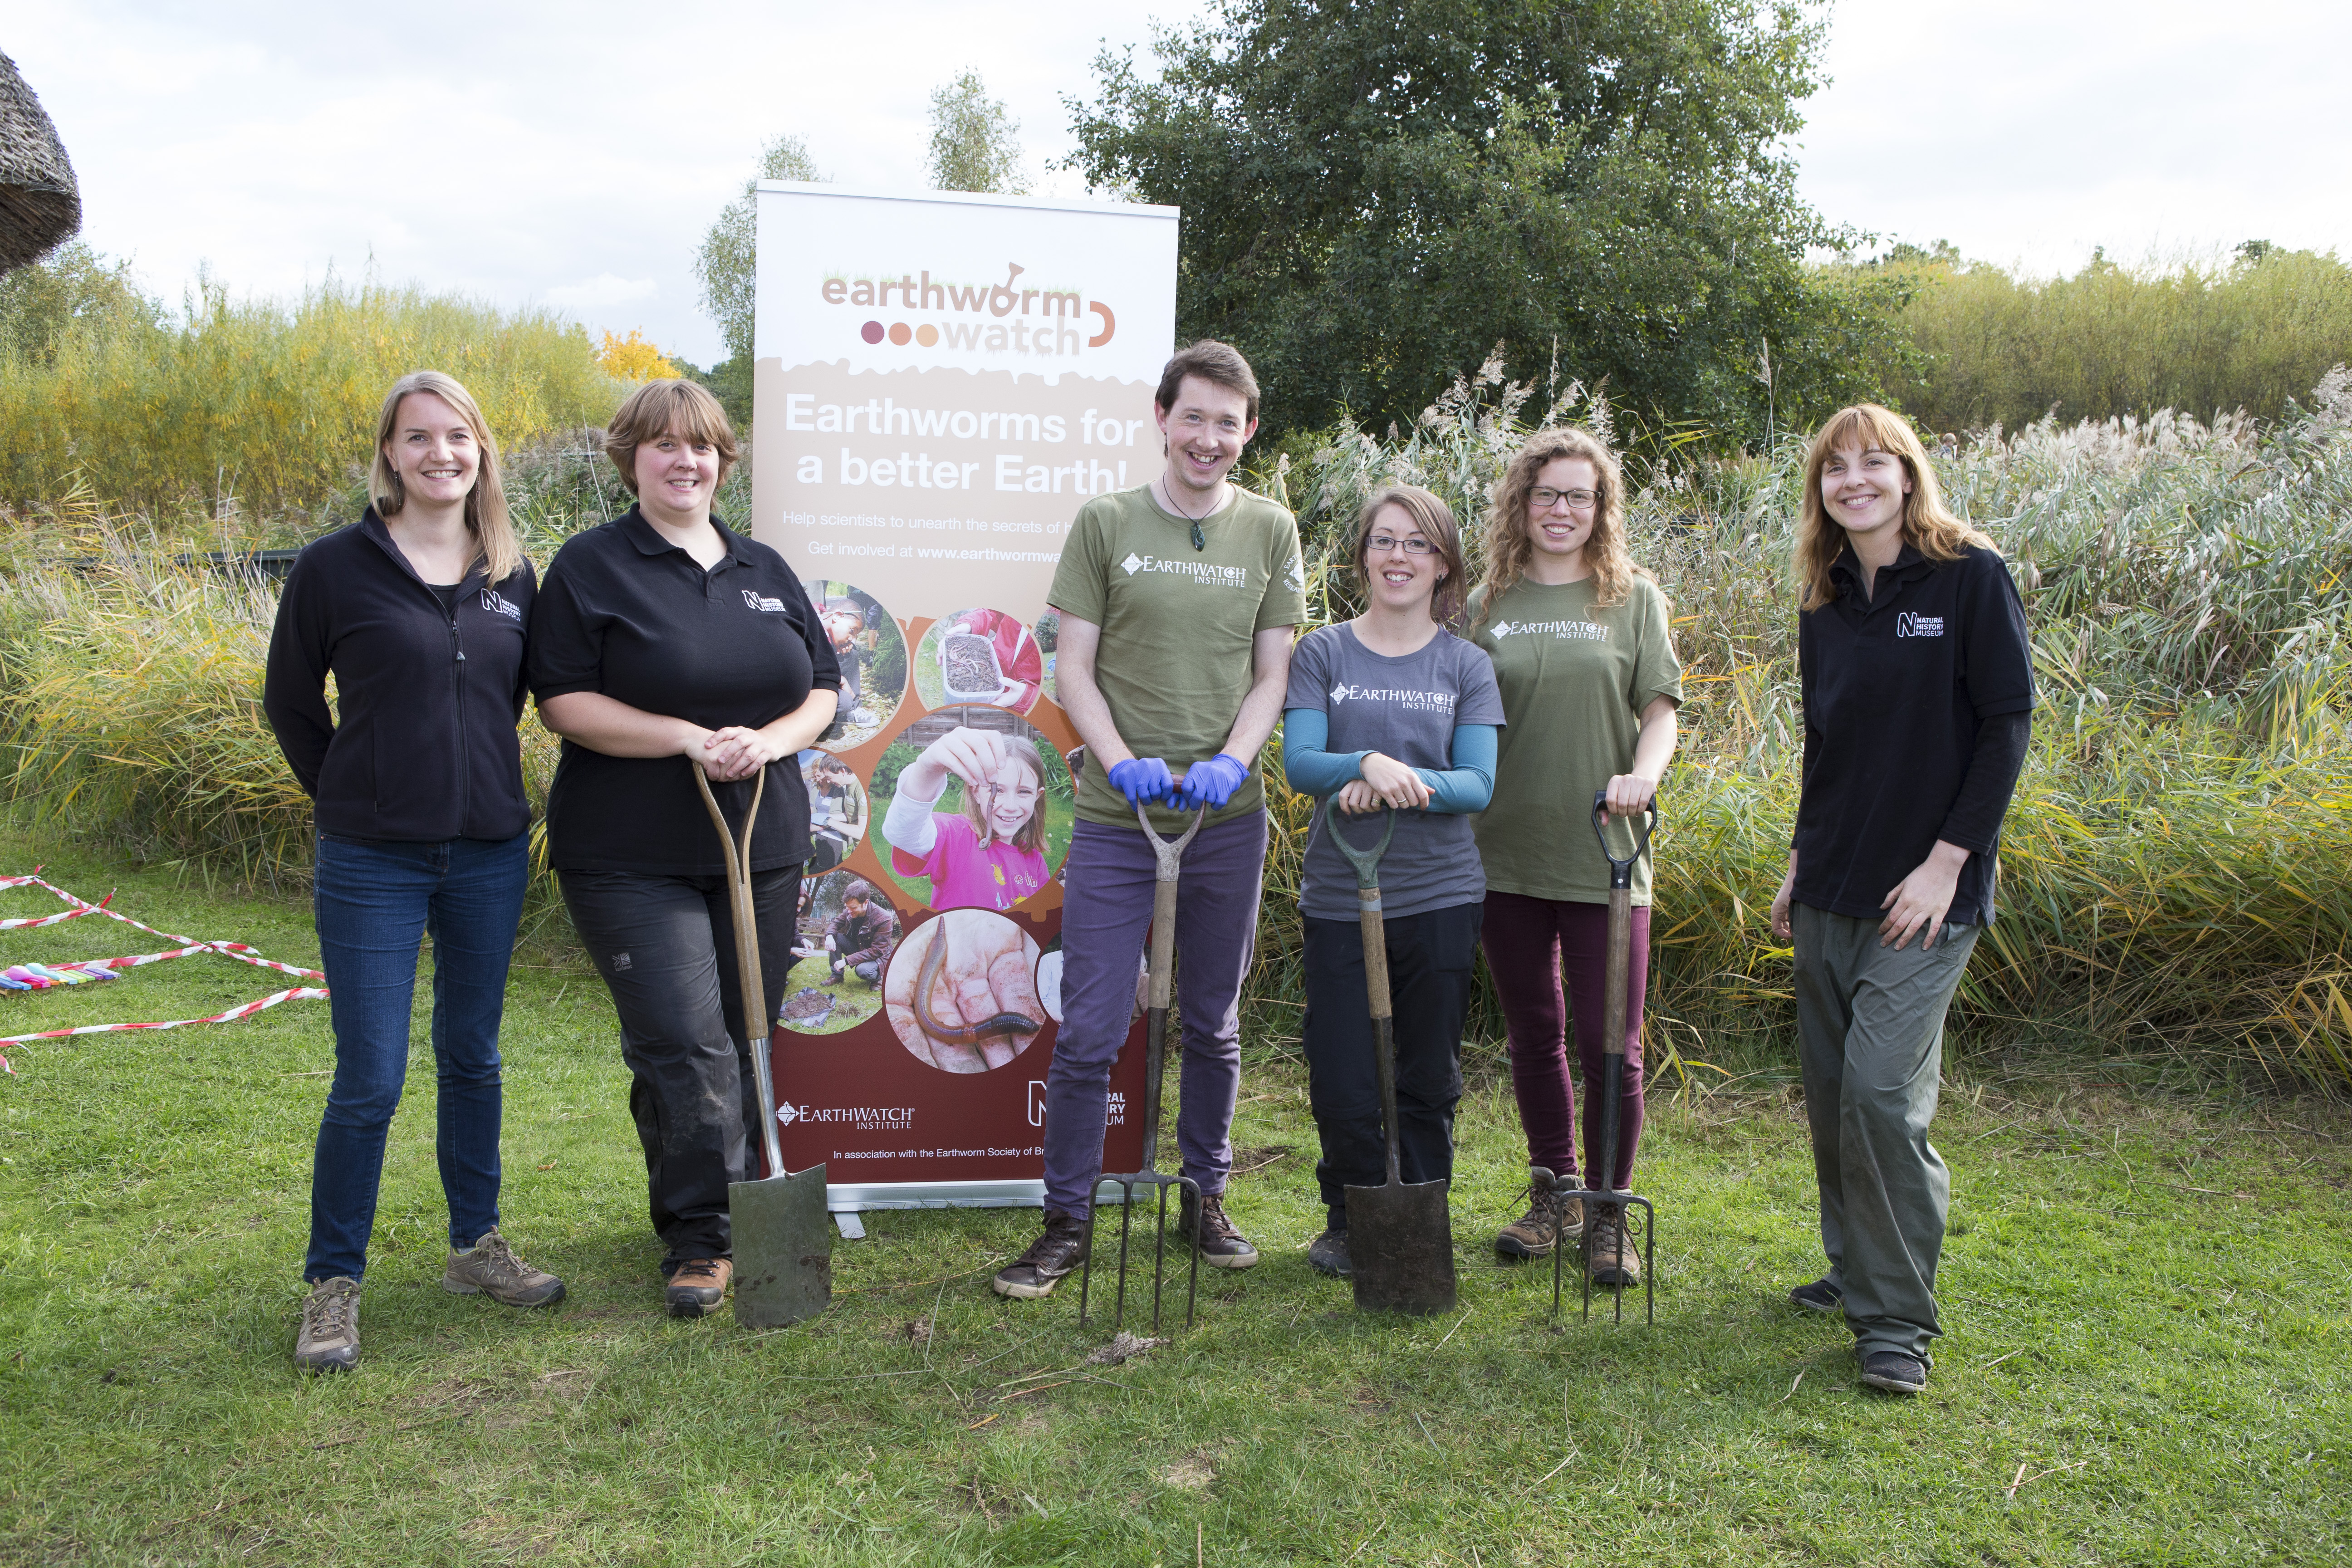 Earthworm Watch team members at the London Wetland Centre event. Photo credit: Earthwatch Institute / John Hunt